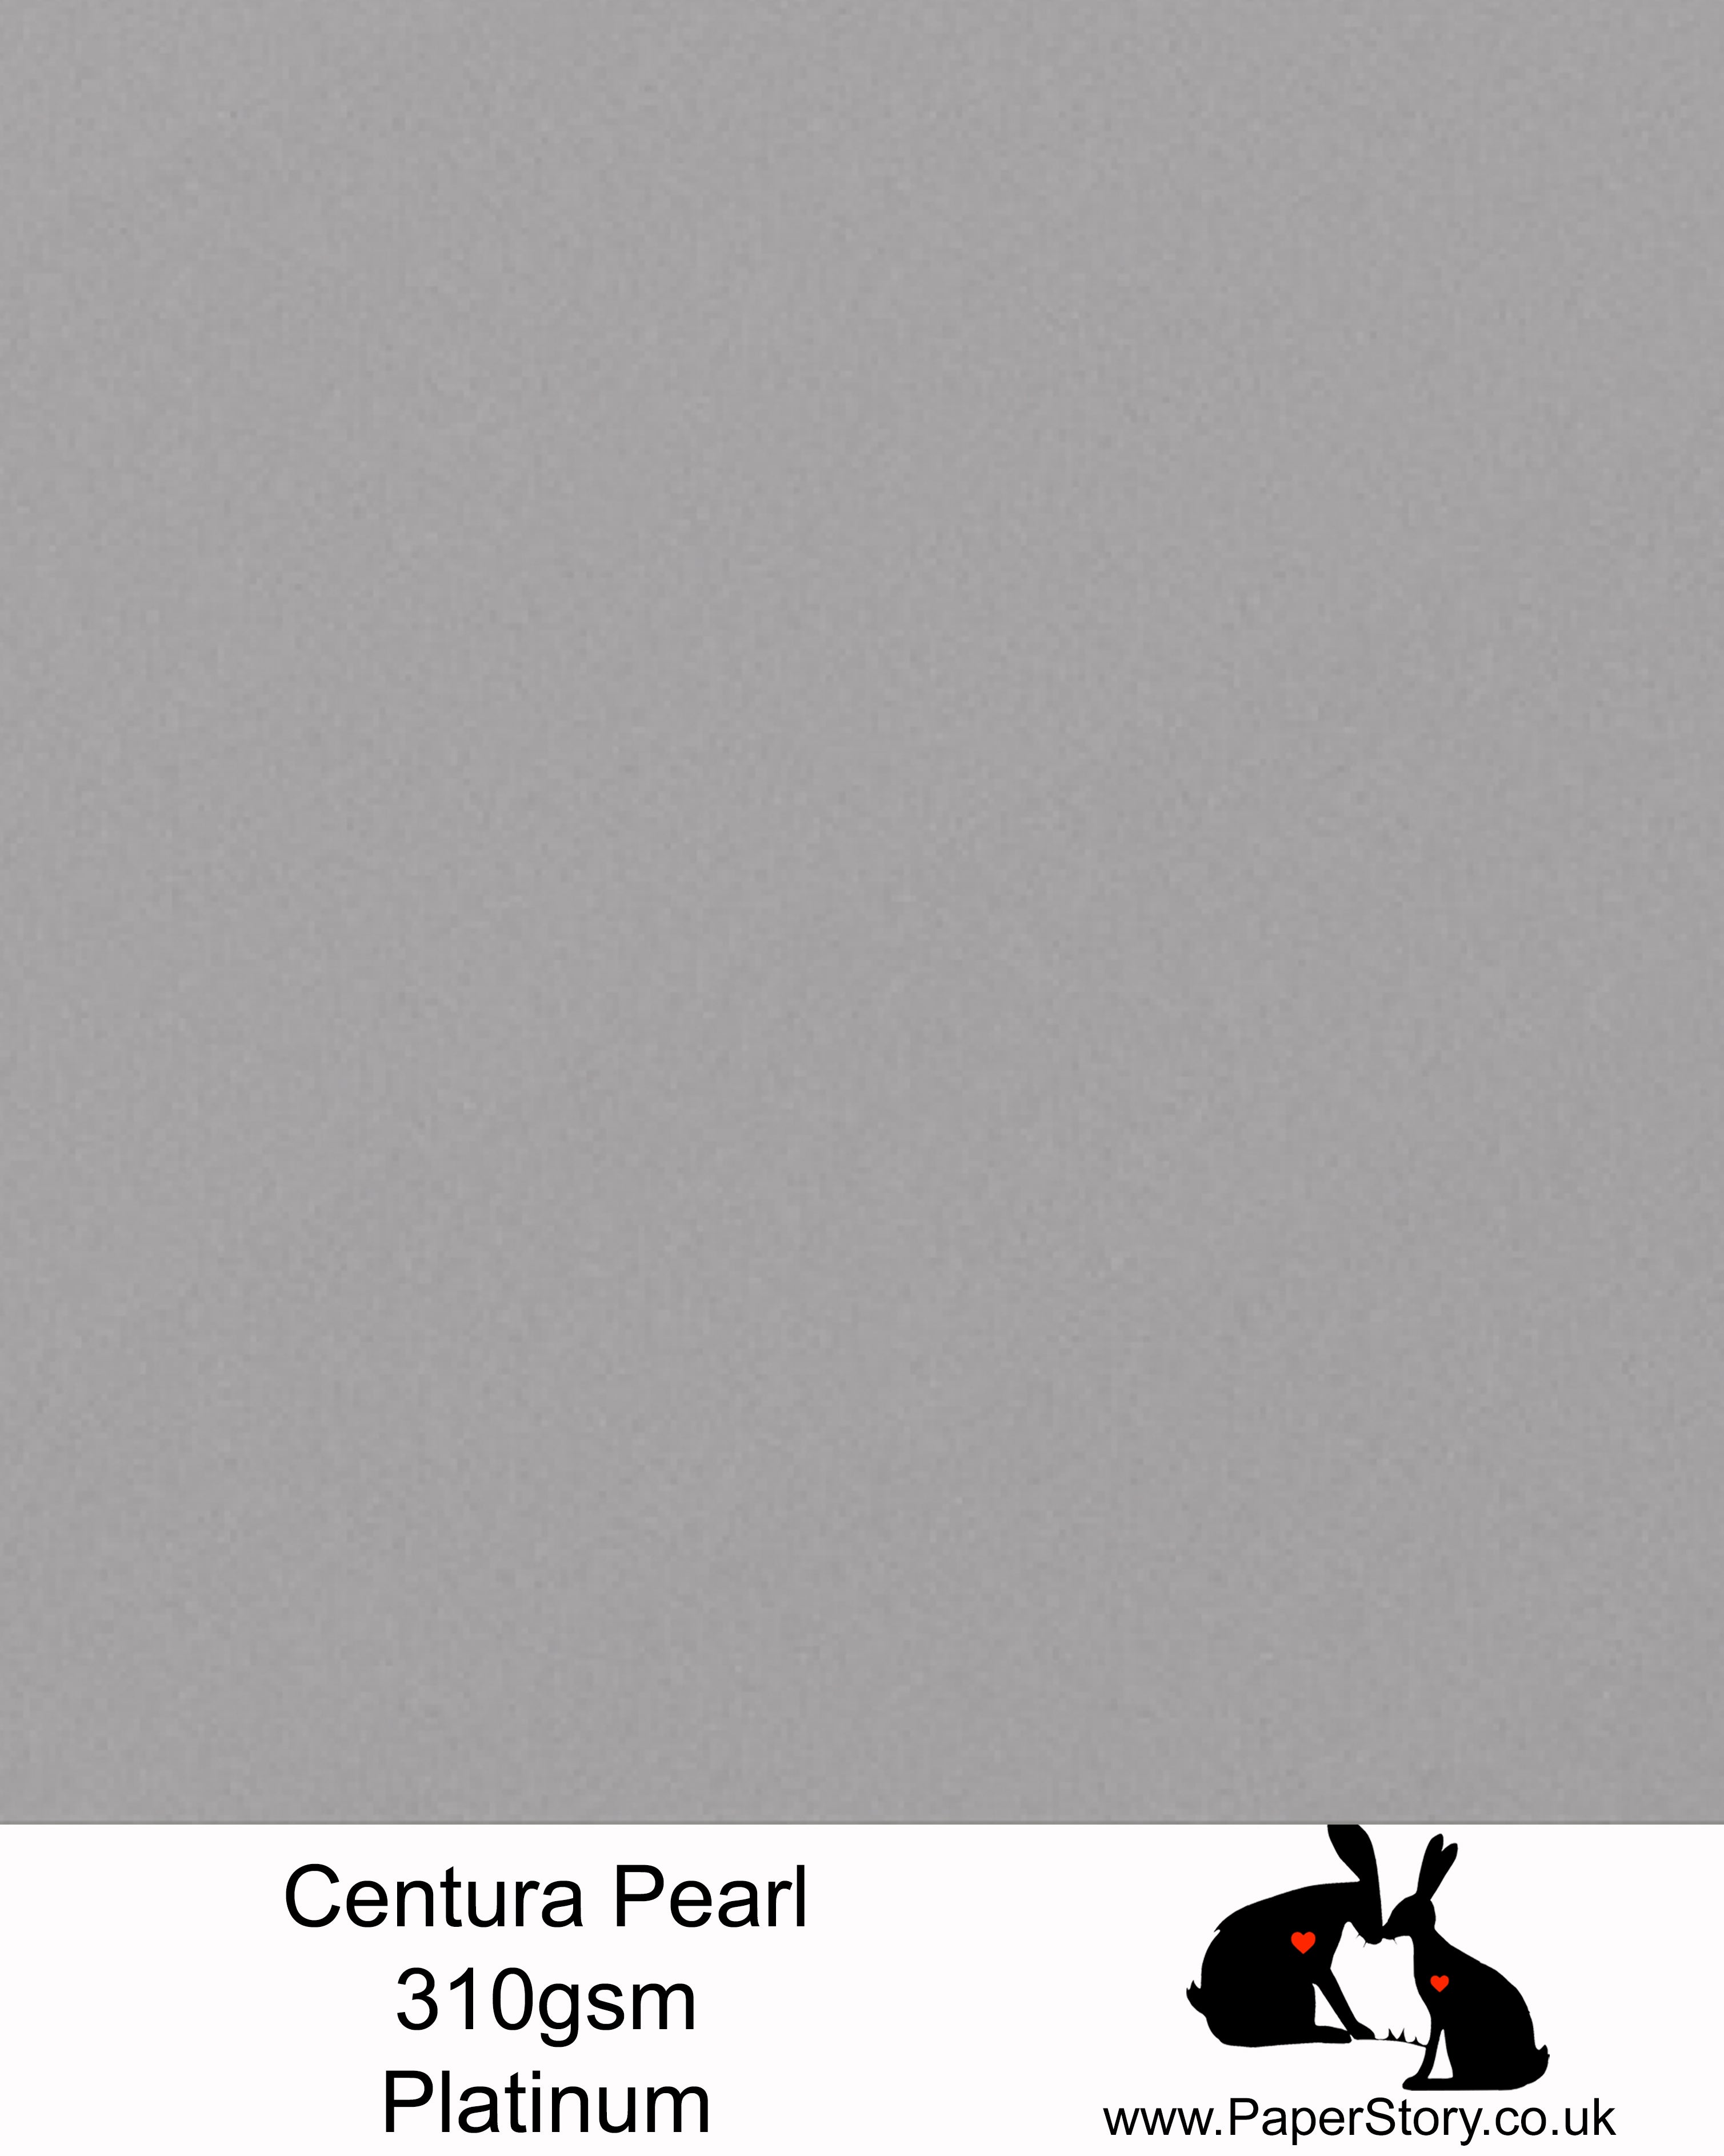 Centura Pearl single sided card 310 gsm. Platinum, is a deep silver with a hint of cool blue. Pearlescent one side, white printable surface on the other. High-quality Pearlescent card made in the UK, perfect for wedding cards, greetings cards, boxes and art and craft projects.